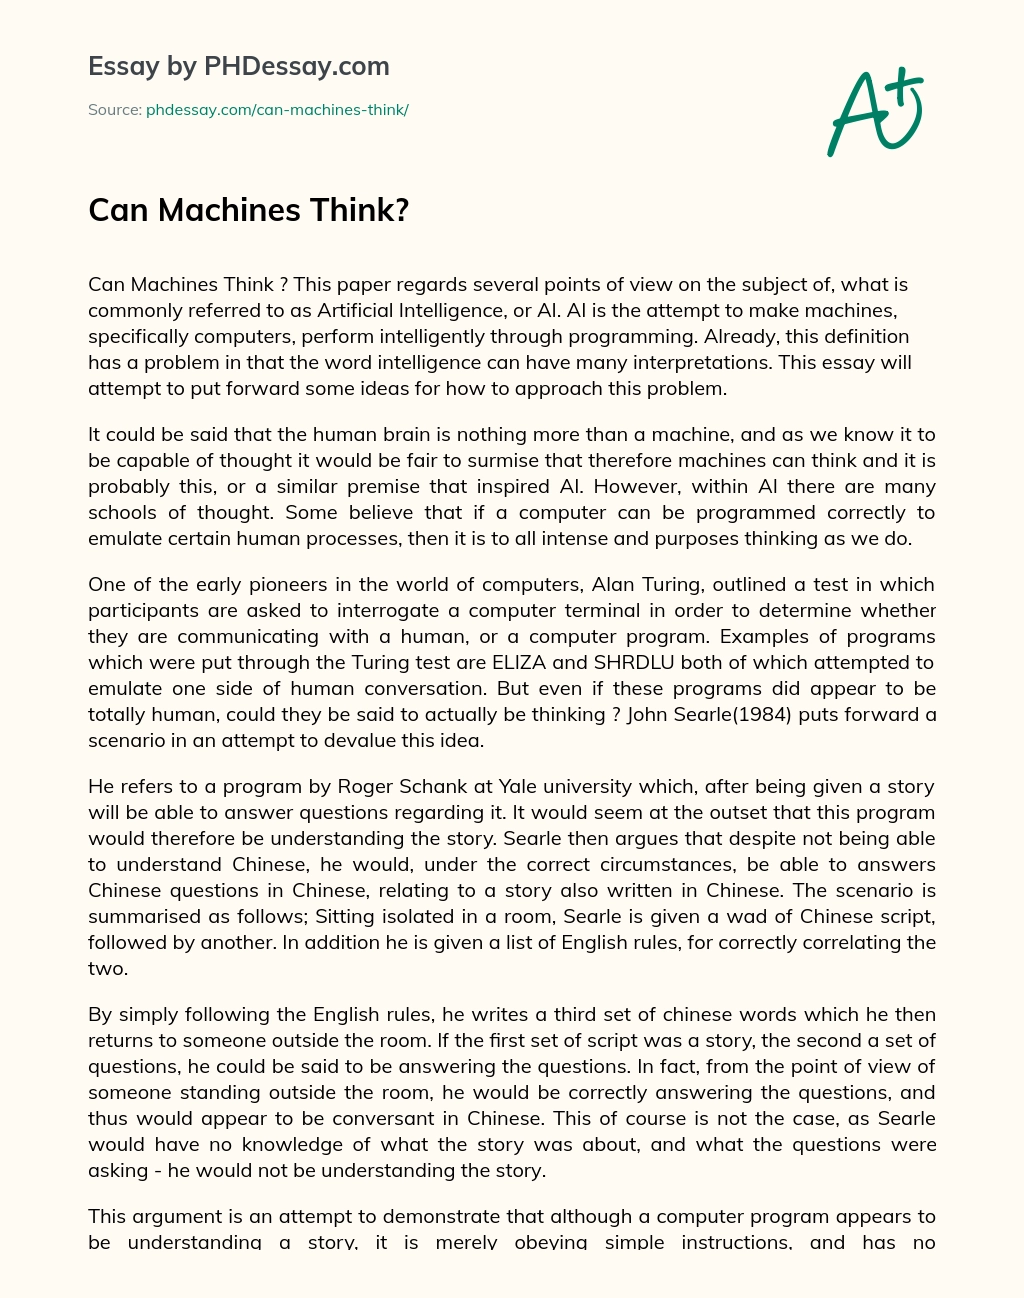 Can Machines Think? essay